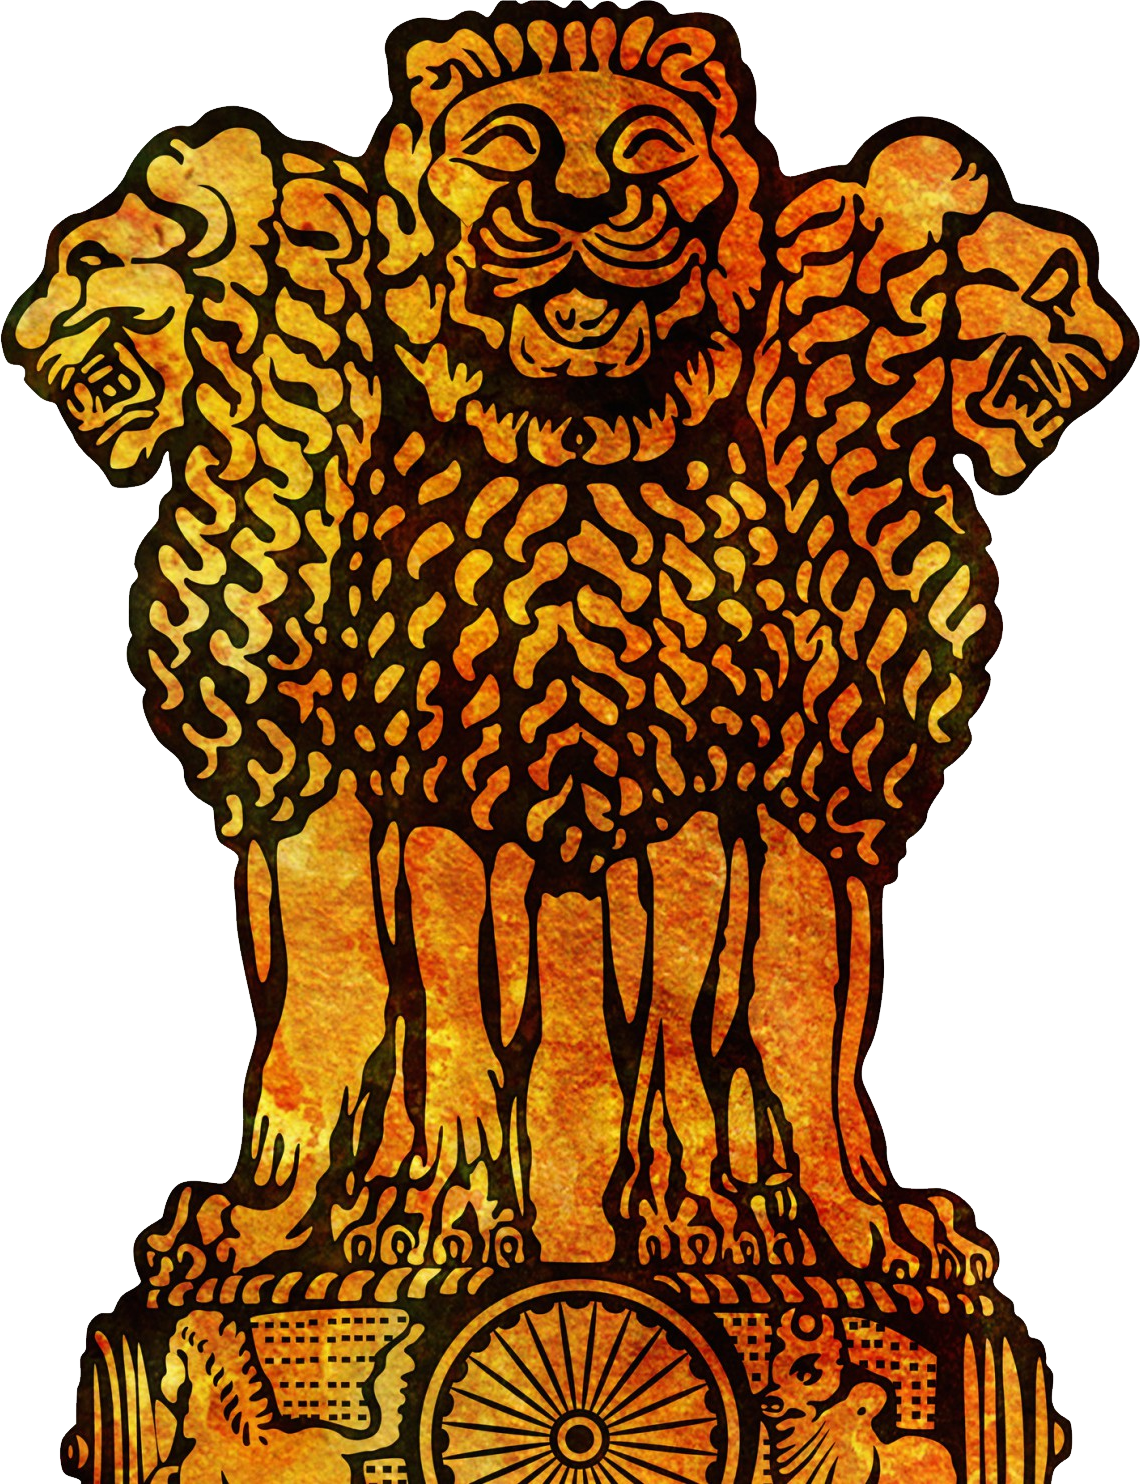 Coat of Arms of India PNG Free Download